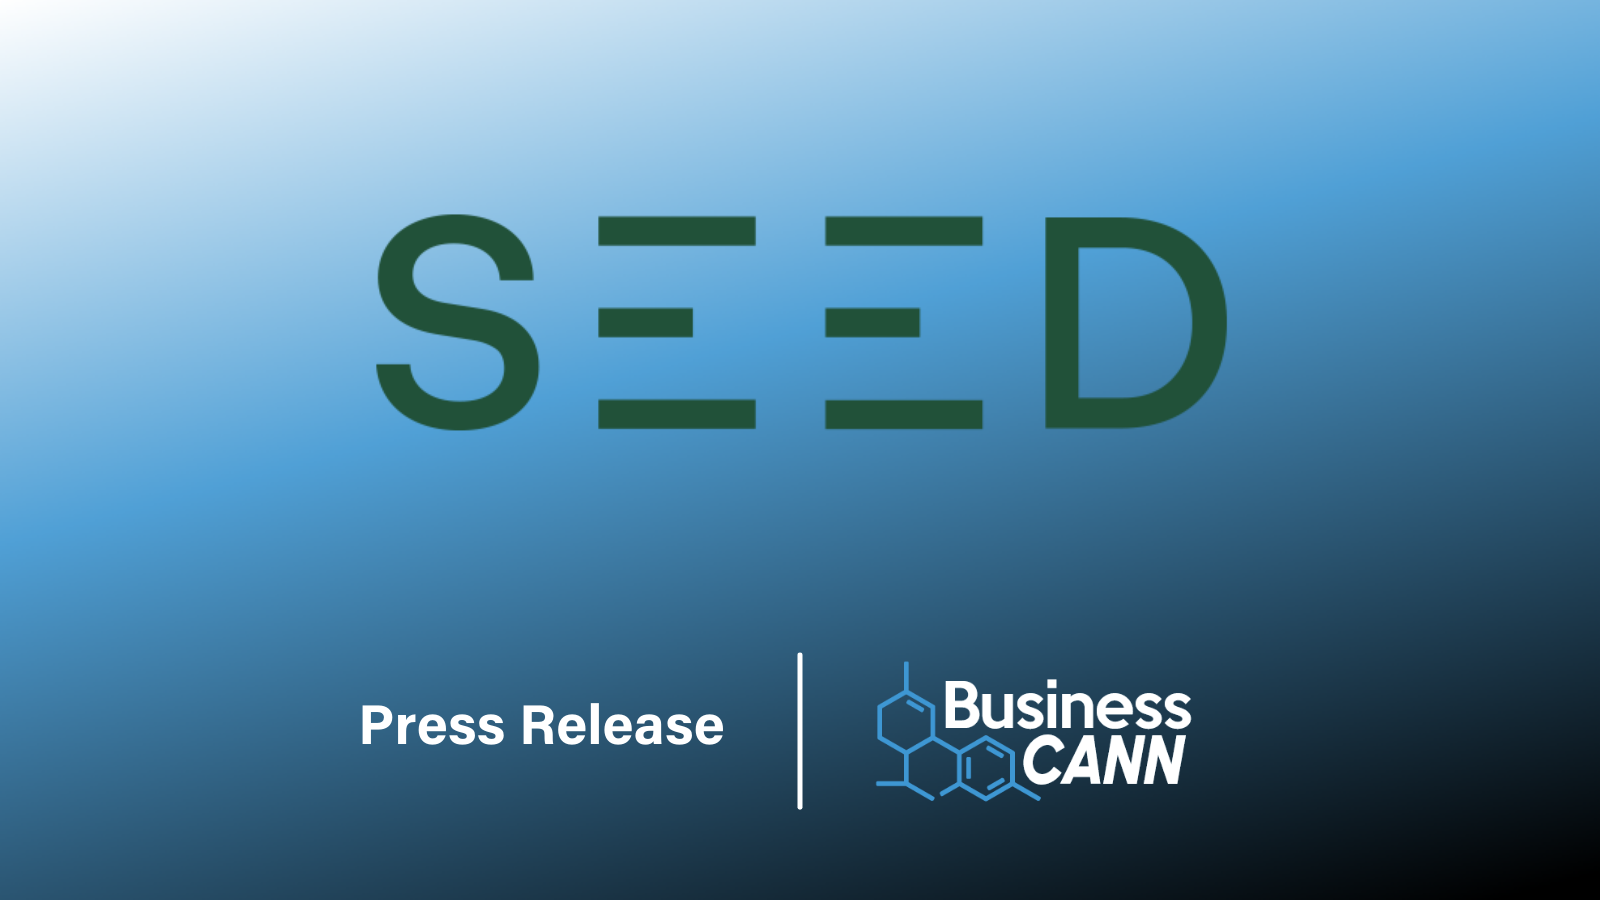 Little Green Pharma Ltd is pleased to announce its intention to demerge the ownership of its psychedelics business, Reset Mind Sciences Limited, from the LGP Group.